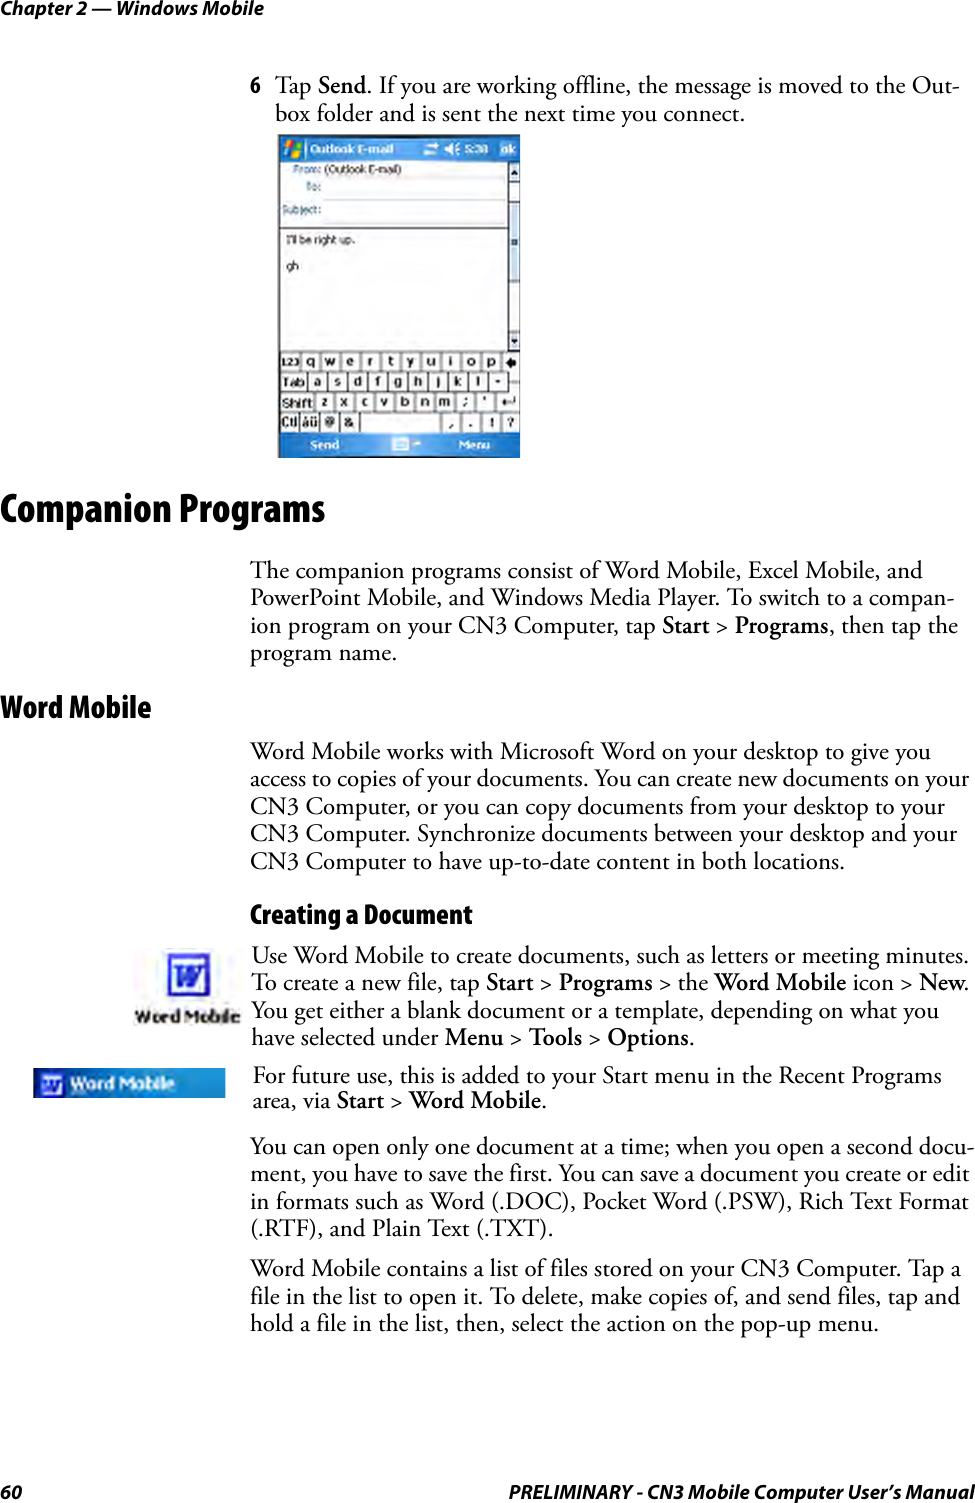 Chapter 2 — Windows Mobile60 PRELIMINARY - CN3 Mobile Computer User’s Manual6Tap Send. If you are working offline, the message is moved to the Out-box folder and is sent the next time you connect.Companion ProgramsThe companion programs consist of Word Mobile, Excel Mobile, and PowerPoint Mobile, and Windows Media Player. To switch to a compan-ion program on your CN3 Computer, tap Start &gt; Programs, then tap the program name.Word MobileWord Mobile works with Microsoft Word on your desktop to give you access to copies of your documents. You can create new documents on your CN3 Computer, or you can copy documents from your desktop to your CN3 Computer. Synchronize documents between your desktop and your CN3 Computer to have up-to-date content in both locations.Creating a DocumentYou can open only one document at a time; when you open a second docu-ment, you have to save the first. You can save a document you create or edit in formats such as Word (.DOC), Pocket Word (.PSW), Rich Text Format (.RTF), and Plain Text (.TXT).Word Mobile contains a list of files stored on your CN3 Computer. Tap a file in the list to open it. To delete, make copies of, and send files, tap and hold a file in the list, then, select the action on the pop-up menu.Use Word Mobile to create documents, such as letters or meeting minutes. To create a new file, tap Start &gt; Programs &gt; the Word Mobile icon &gt; New. You get either a blank document or a template, depending on what you have selected under Menu &gt; Tools &gt; Options.For future use, this is added to your Start menu in the Recent Programs area, via Start &gt; Word Mobile. 